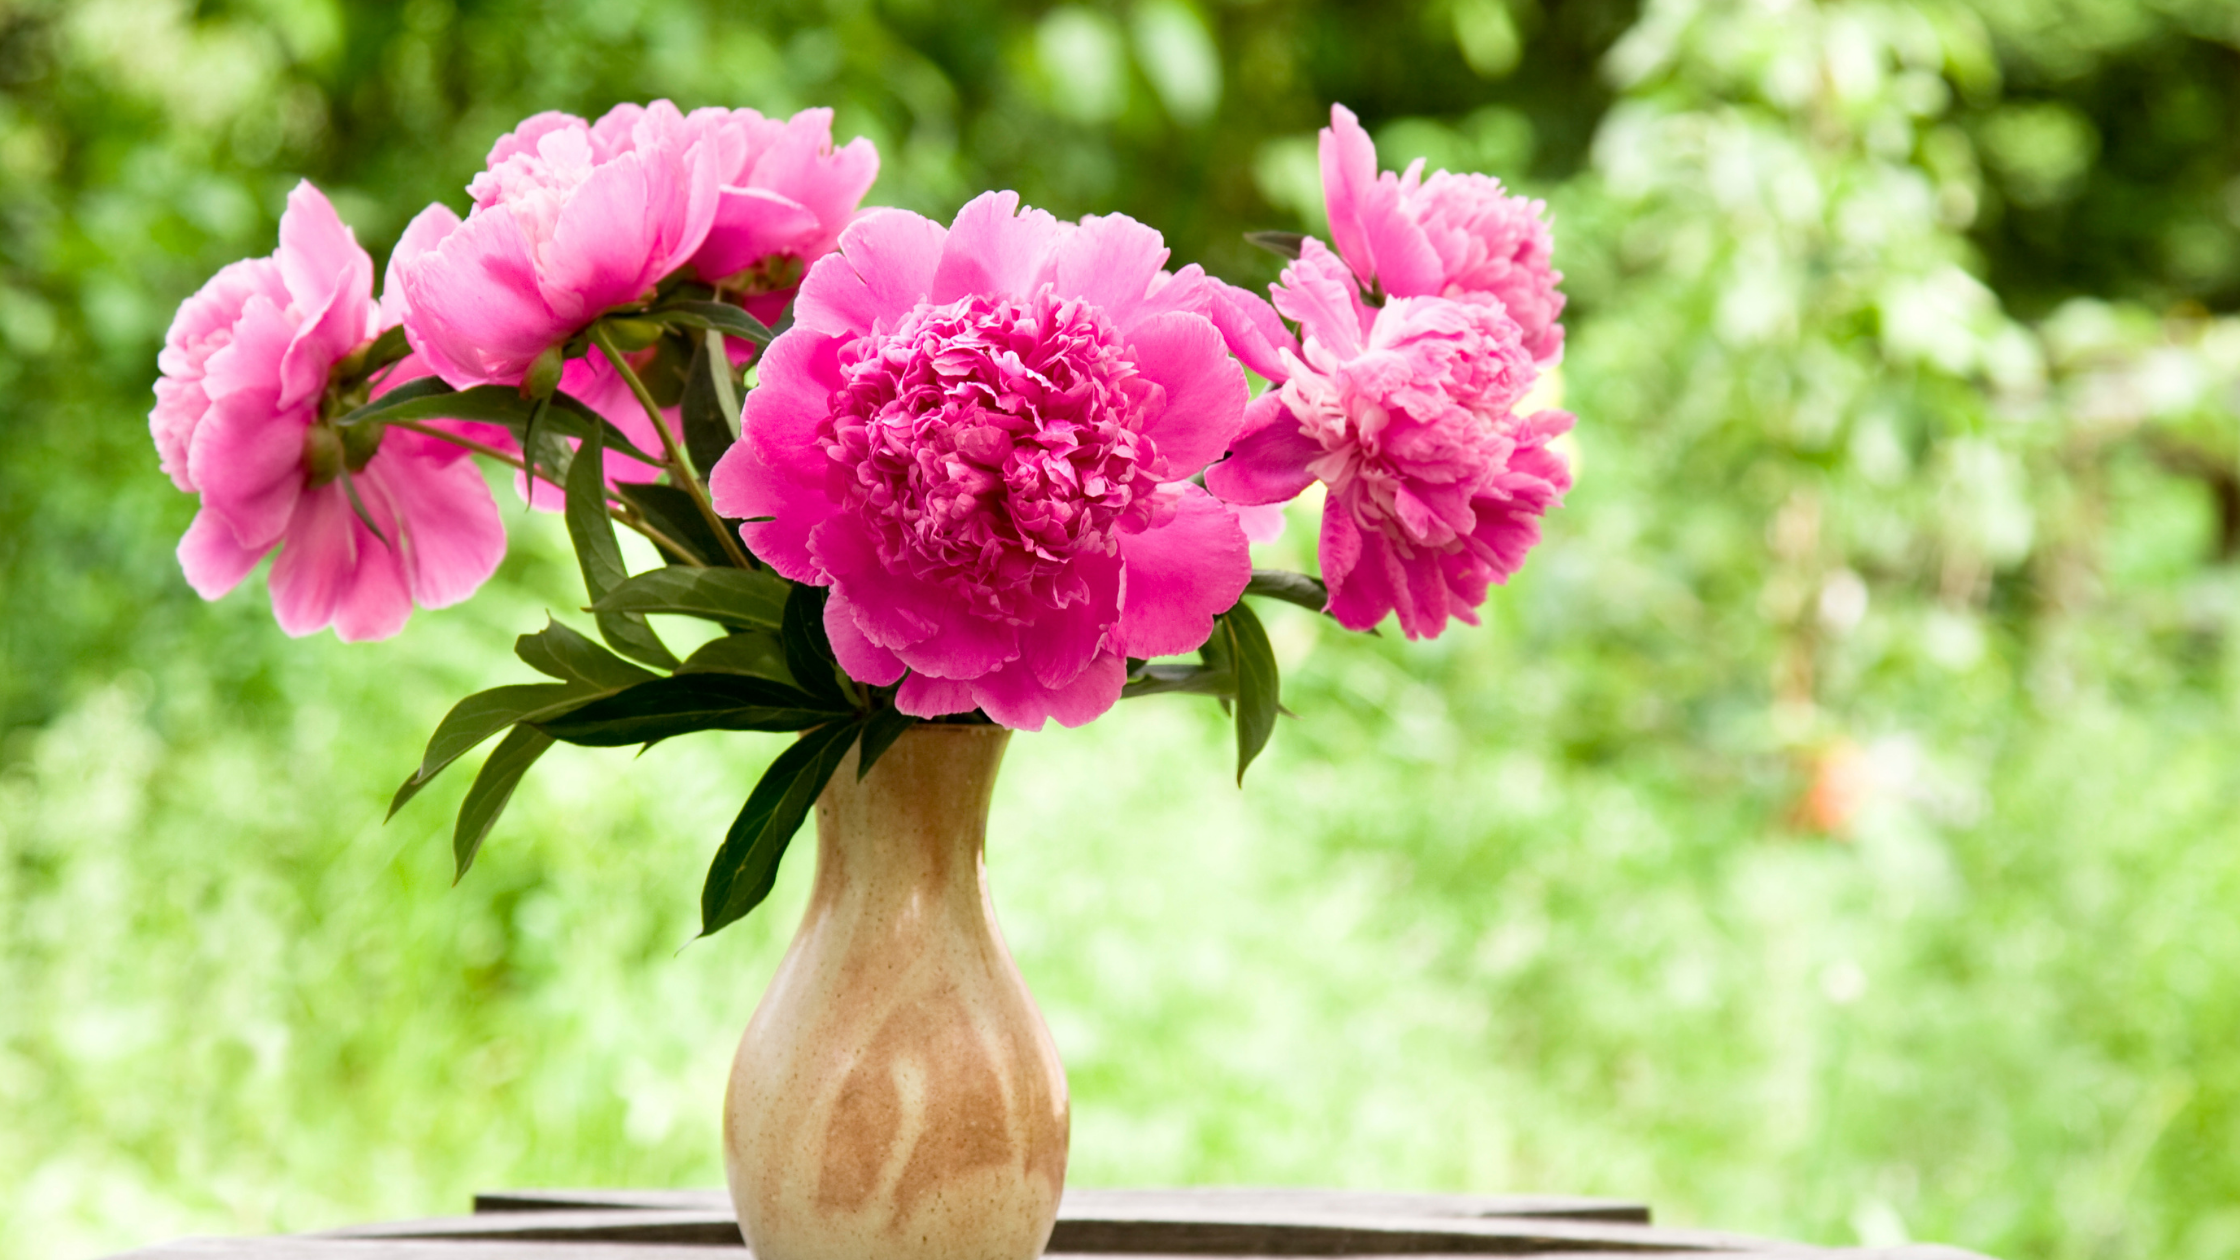 Pink peonies in a wooden vase against a backdrop of trees